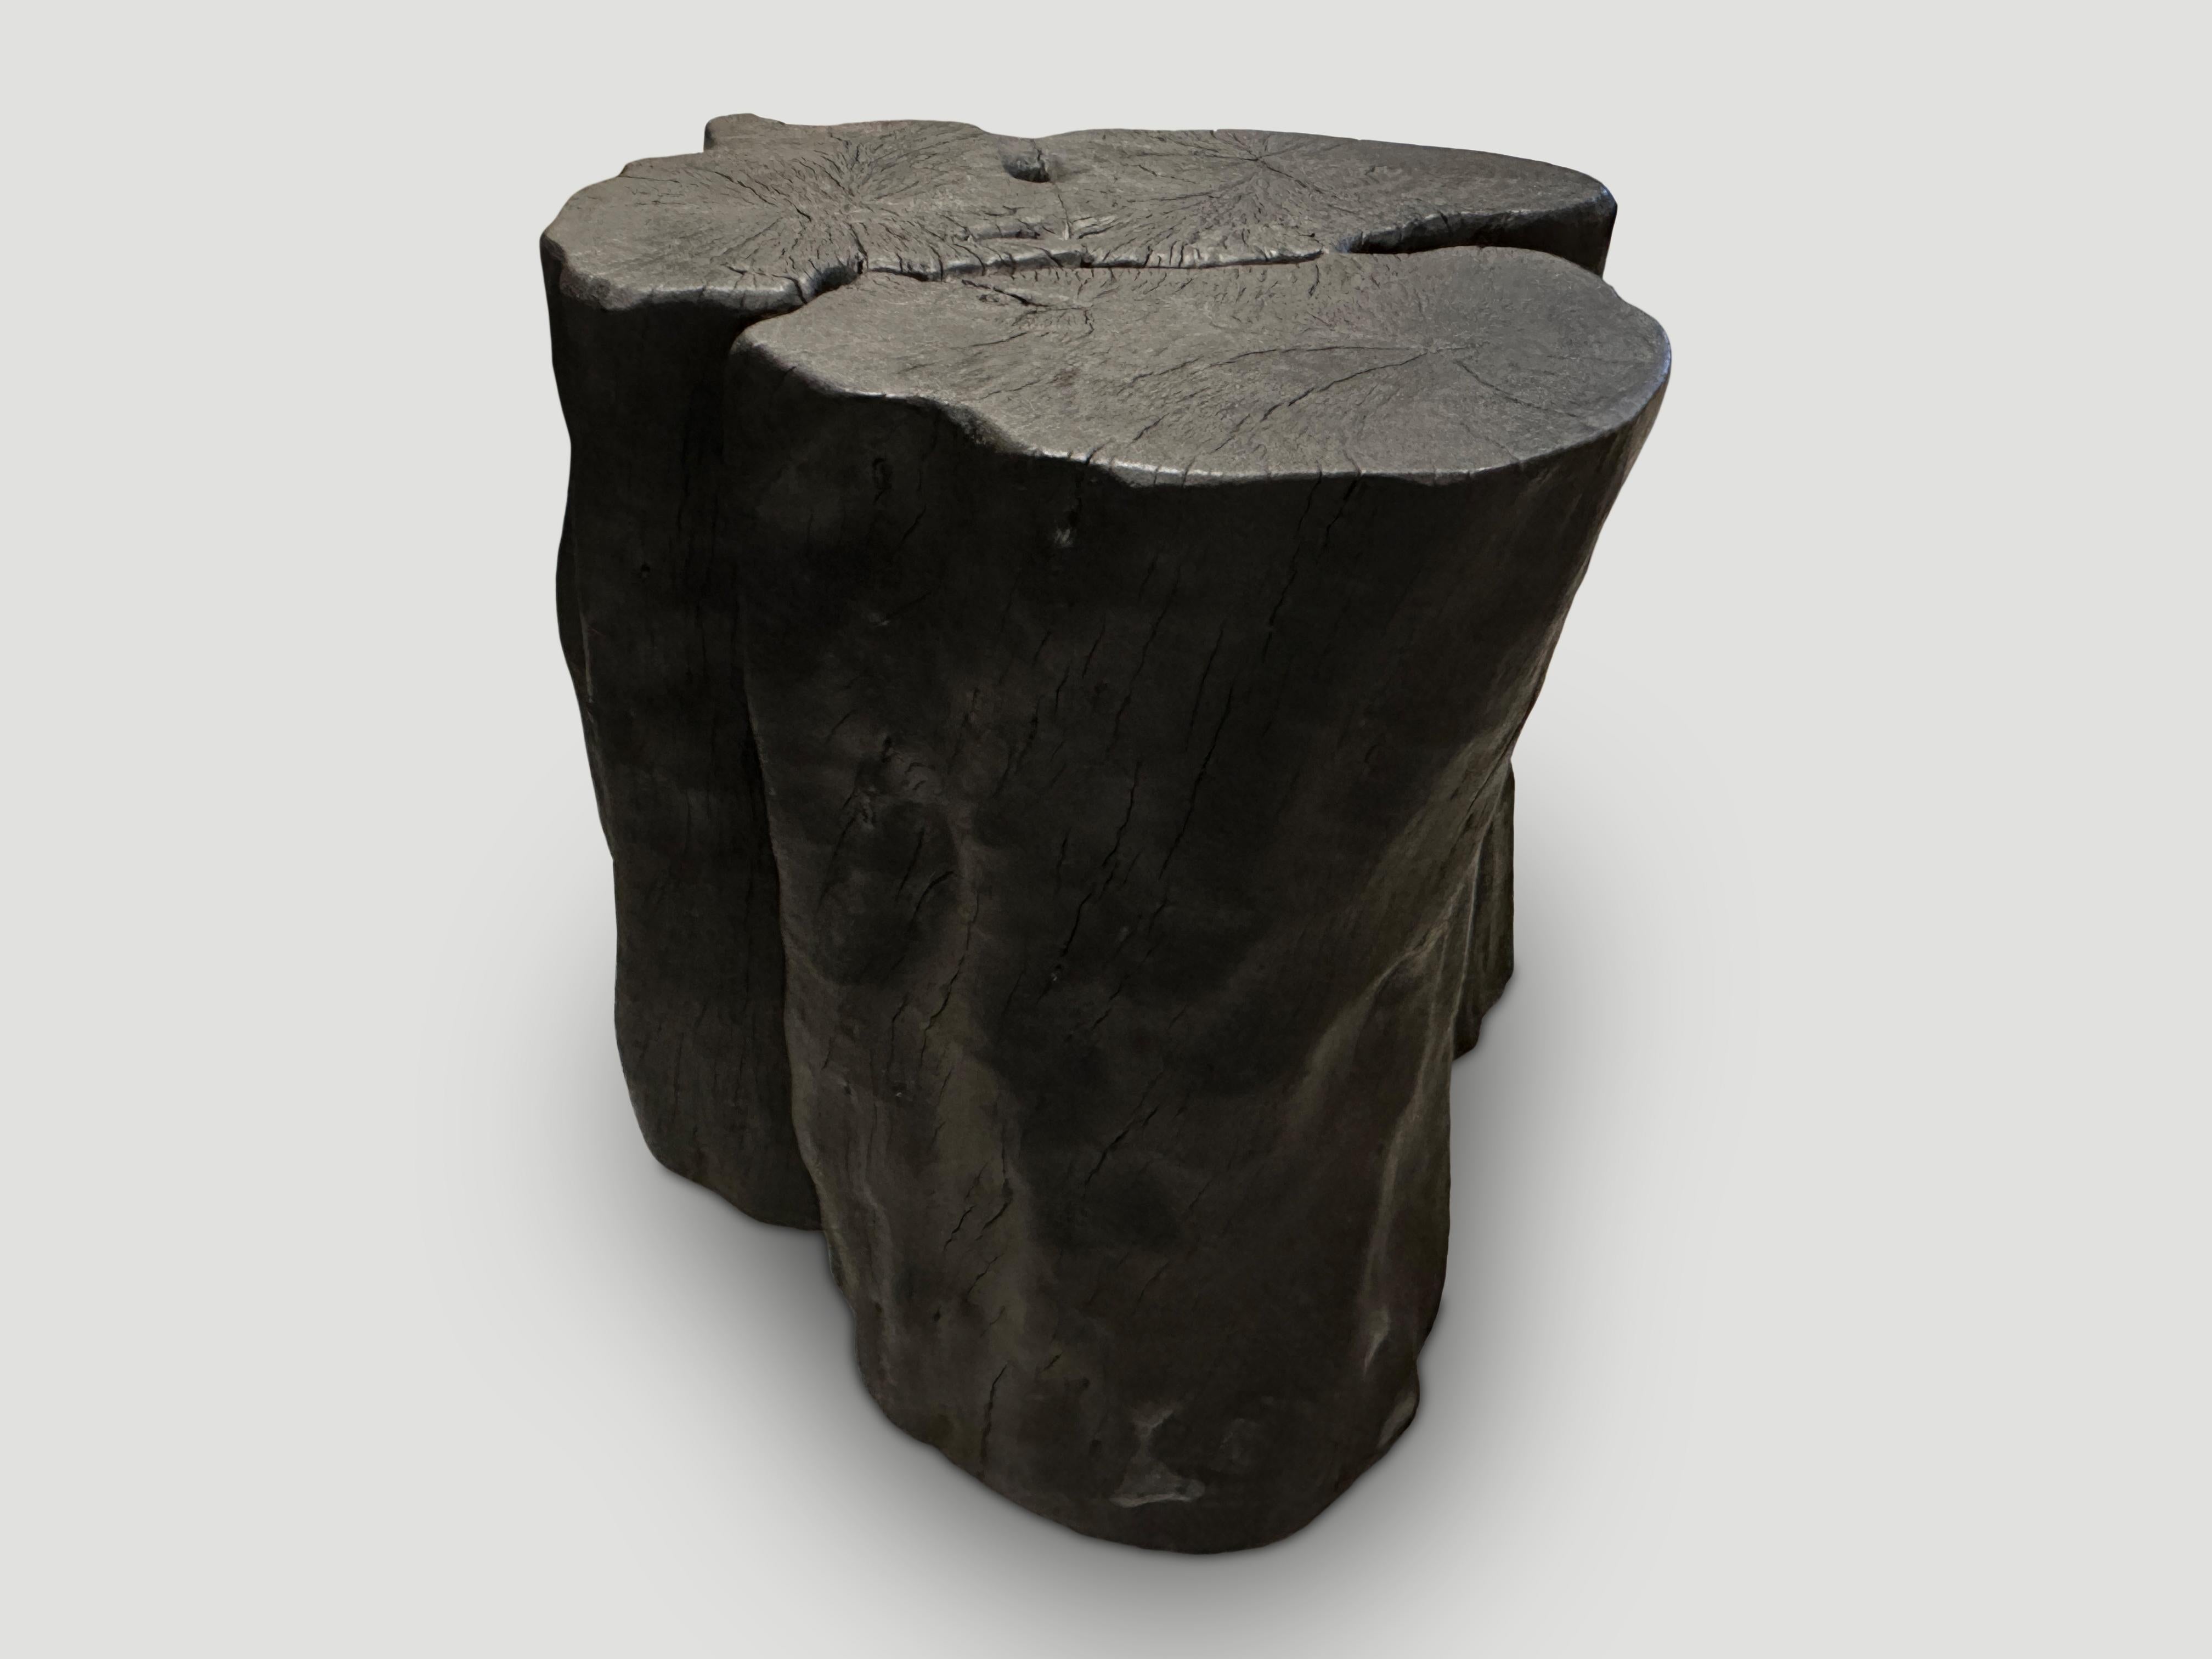 Andrianna Shamaris Amorphous Charred Lychee Wood Side Table In Excellent Condition For Sale In New York, NY